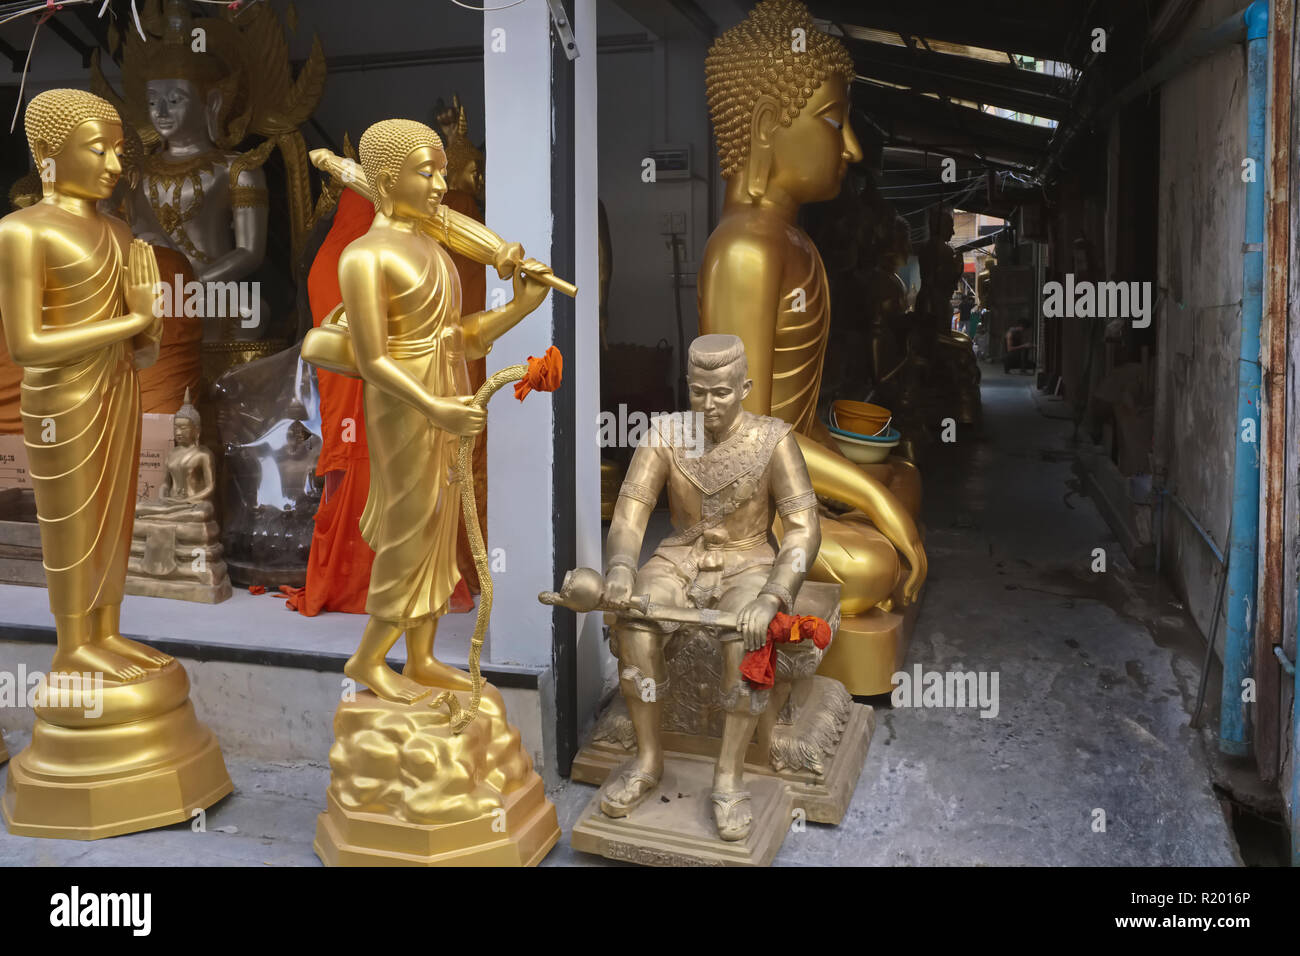 Outside a factory in Bamrung Muang Rd., Bangkok, Thailand, statues of Buddha, Buddhist monks & an old warrior await transportation to their buyers Stock Photo